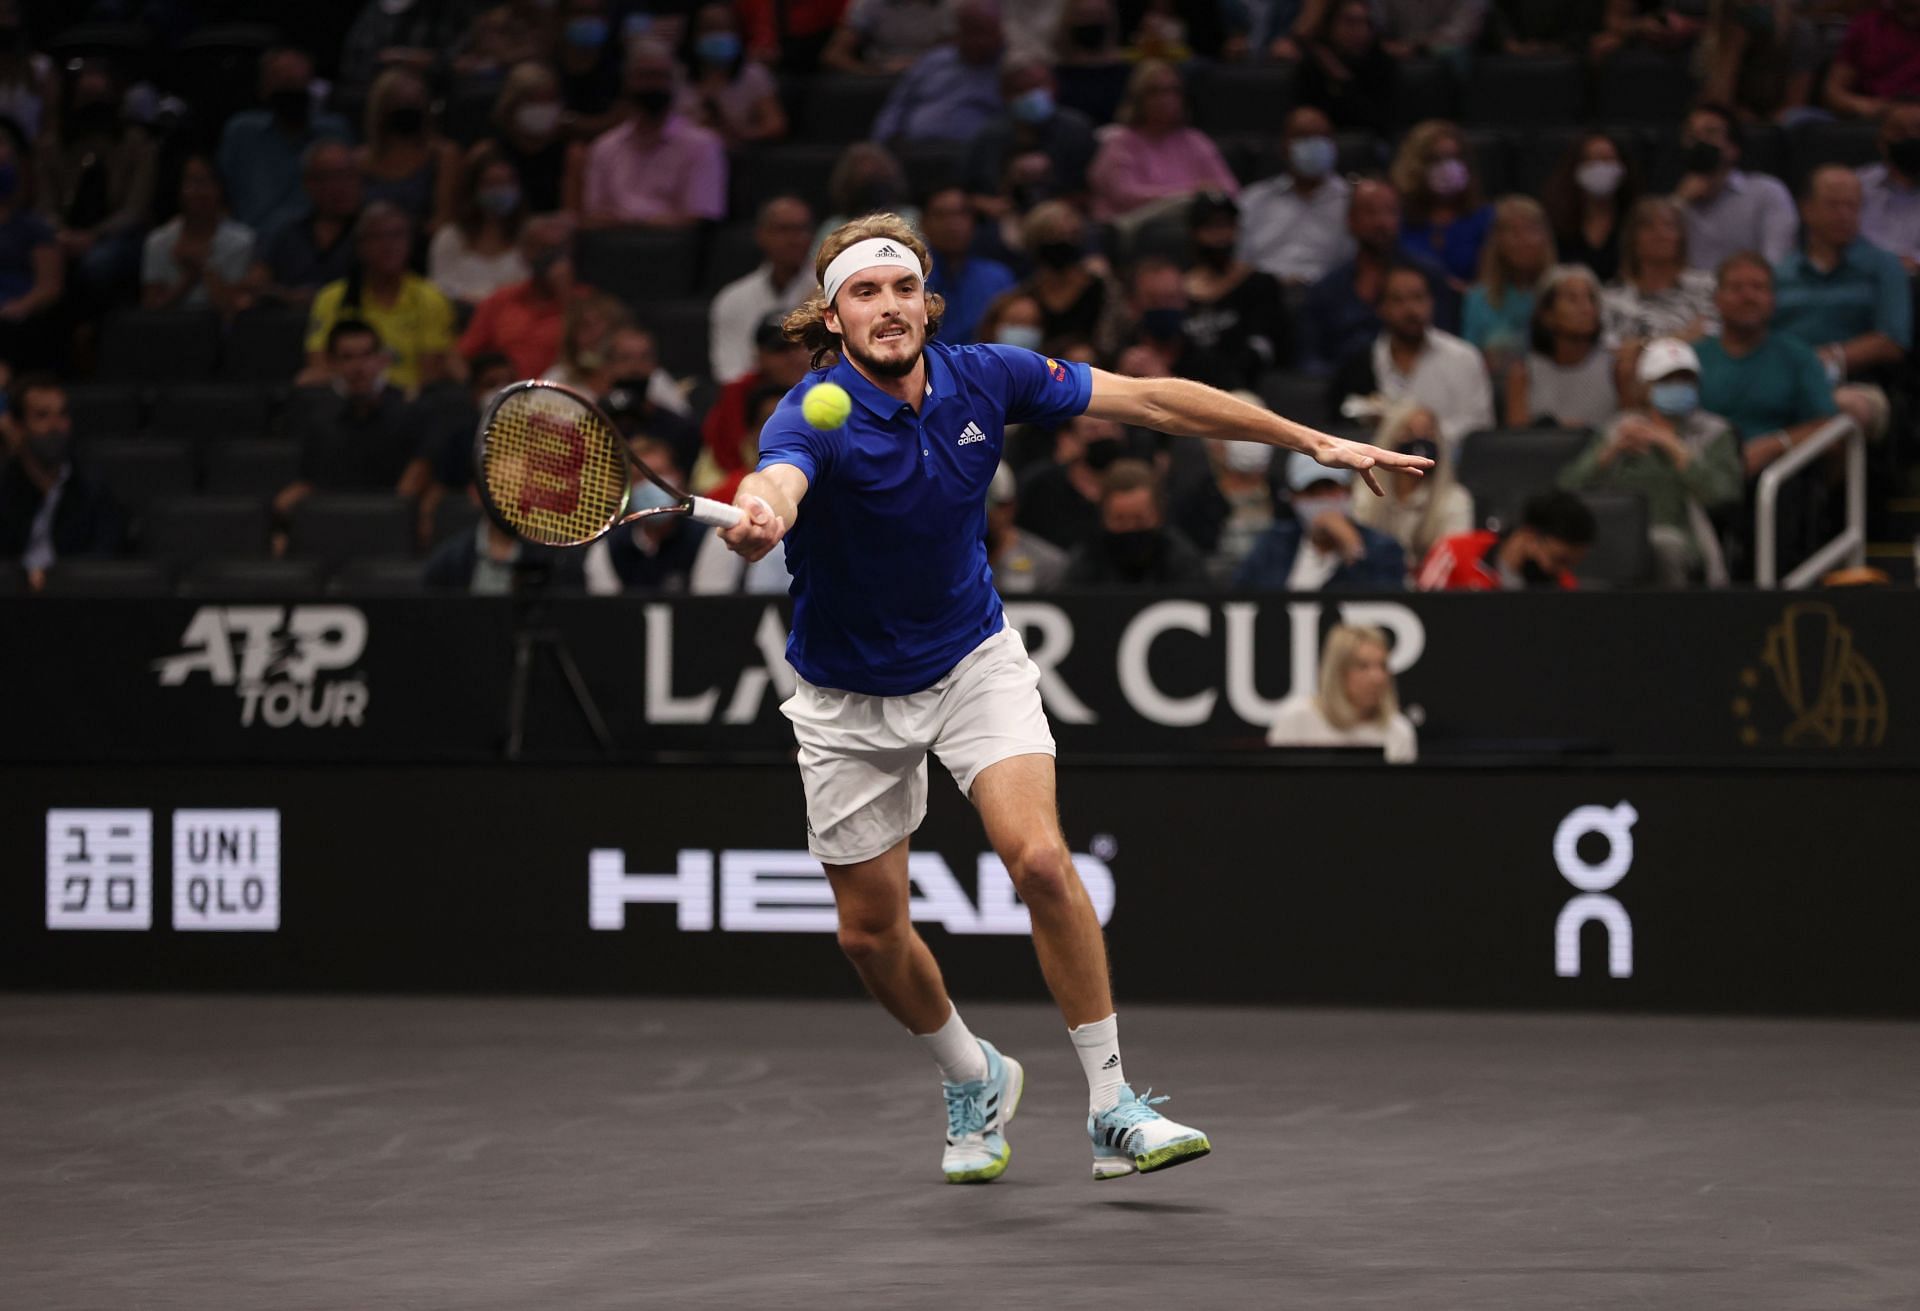 Tsitsipas will represent Greece at the ATP Cup